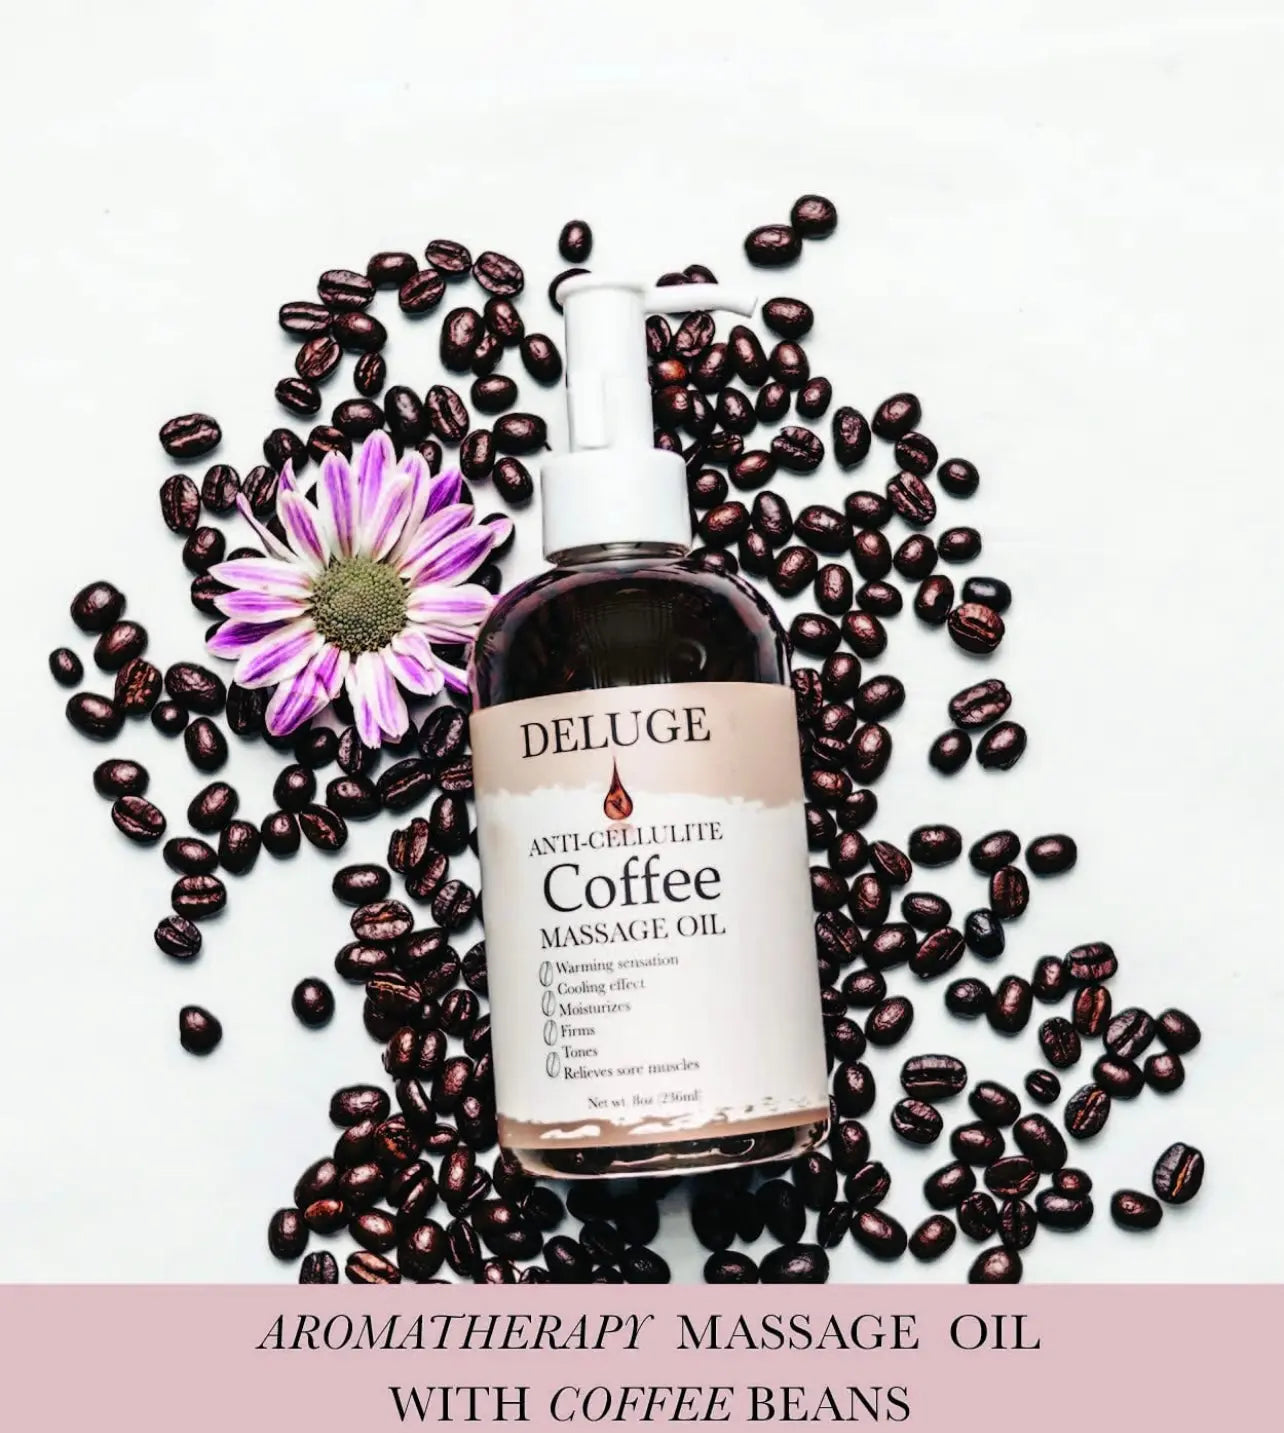 Deluge Original Massage Oil with coffee for Cellulite Treatment, Full Body Spa Relaxation Therapy and Sore Muscles. DELUGE Cosmetics